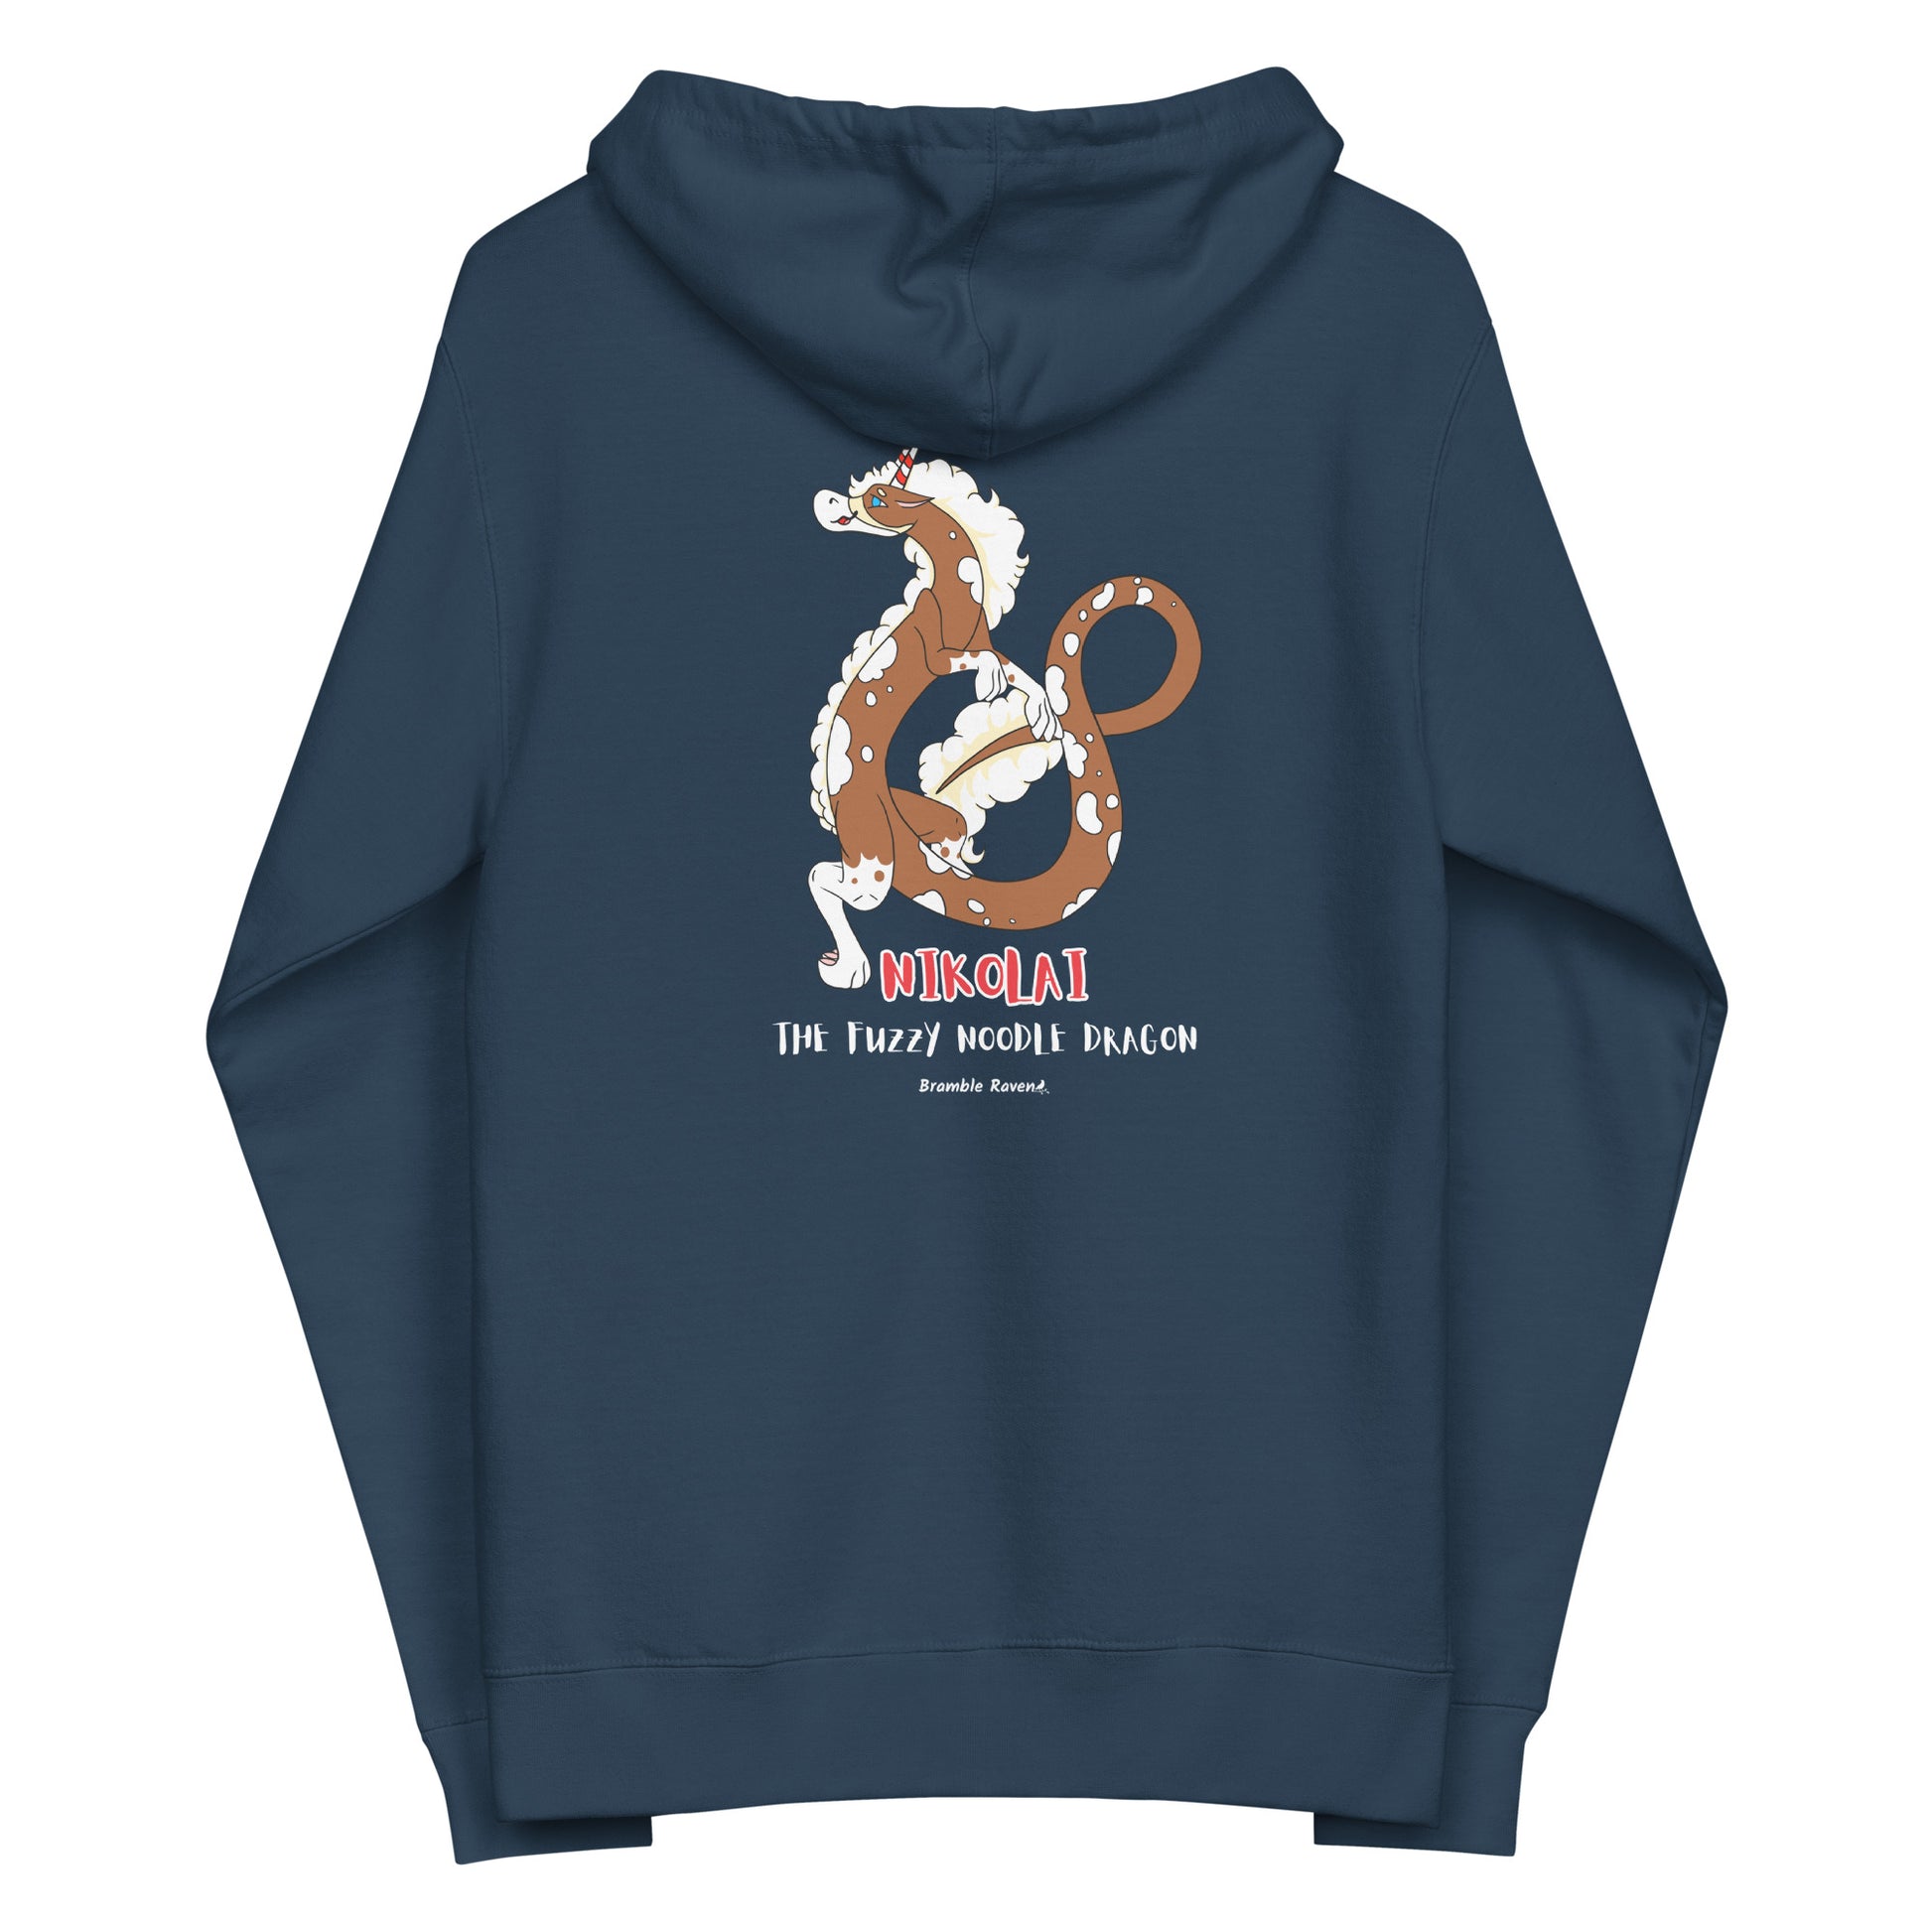 Navy blue colored unisex fleece zip-up hoodie. Features a back design of Nikolai the root beer float fuzzy noodle dragon.